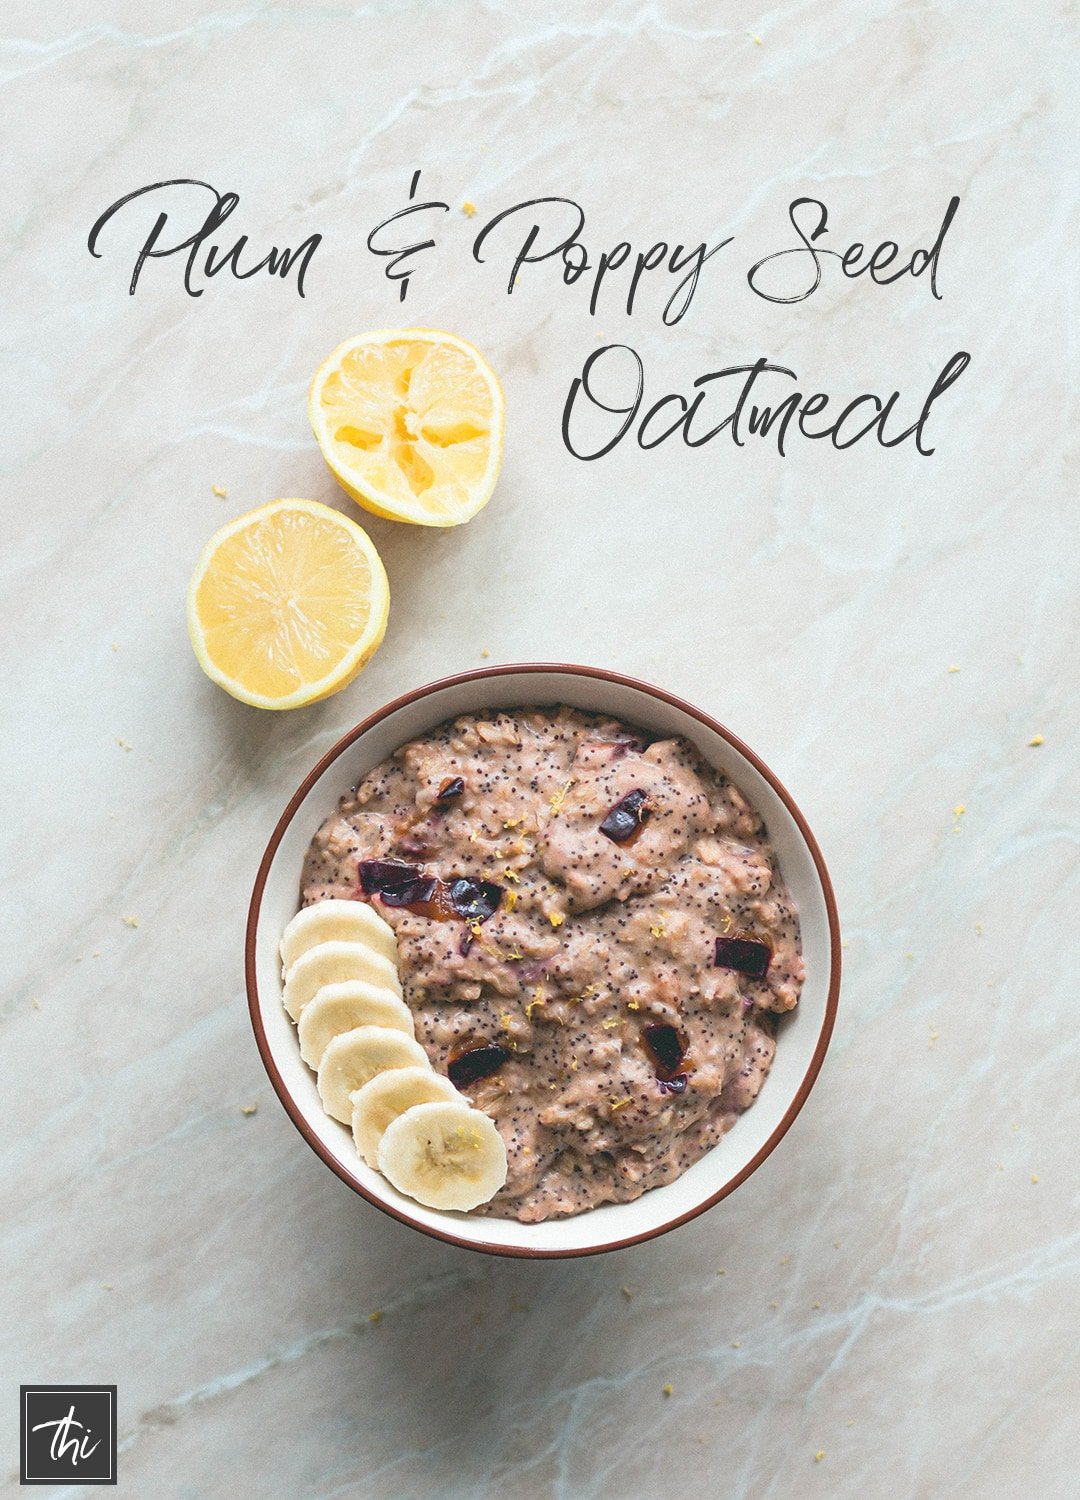 Plum Poppy Seed Oatmeal (vegan, gluten-free) - this oatmeal is really easy to make and it's the perfect healthy breakfast to fuel you through the day! Plums, oats, almond milk, poppy seeds, and a few spices. YUM! | thehealthfulideas.com